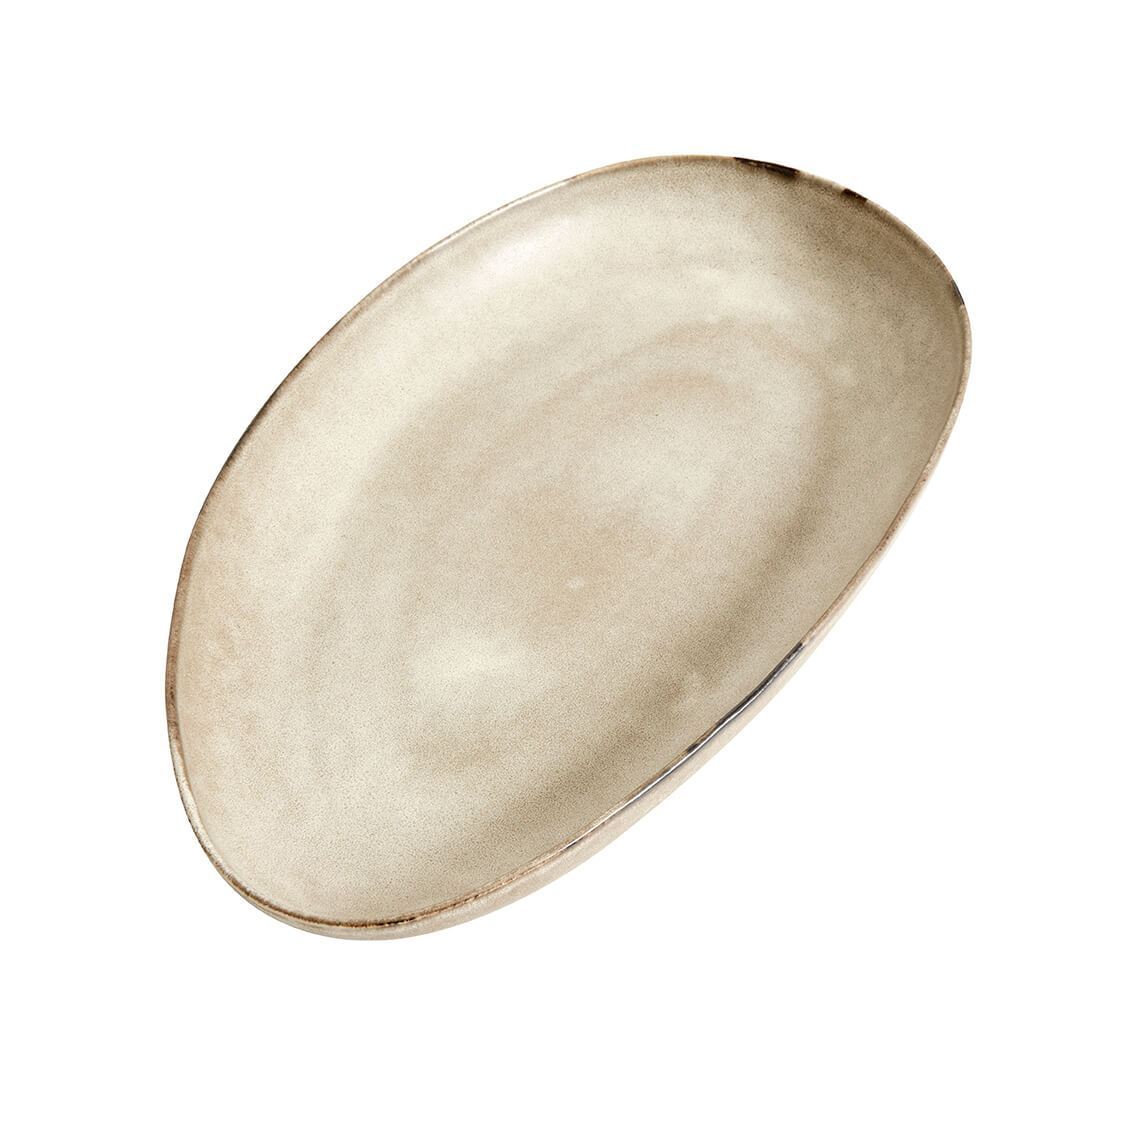 Muubs Mame Serving Plate Oyster, 43 cm